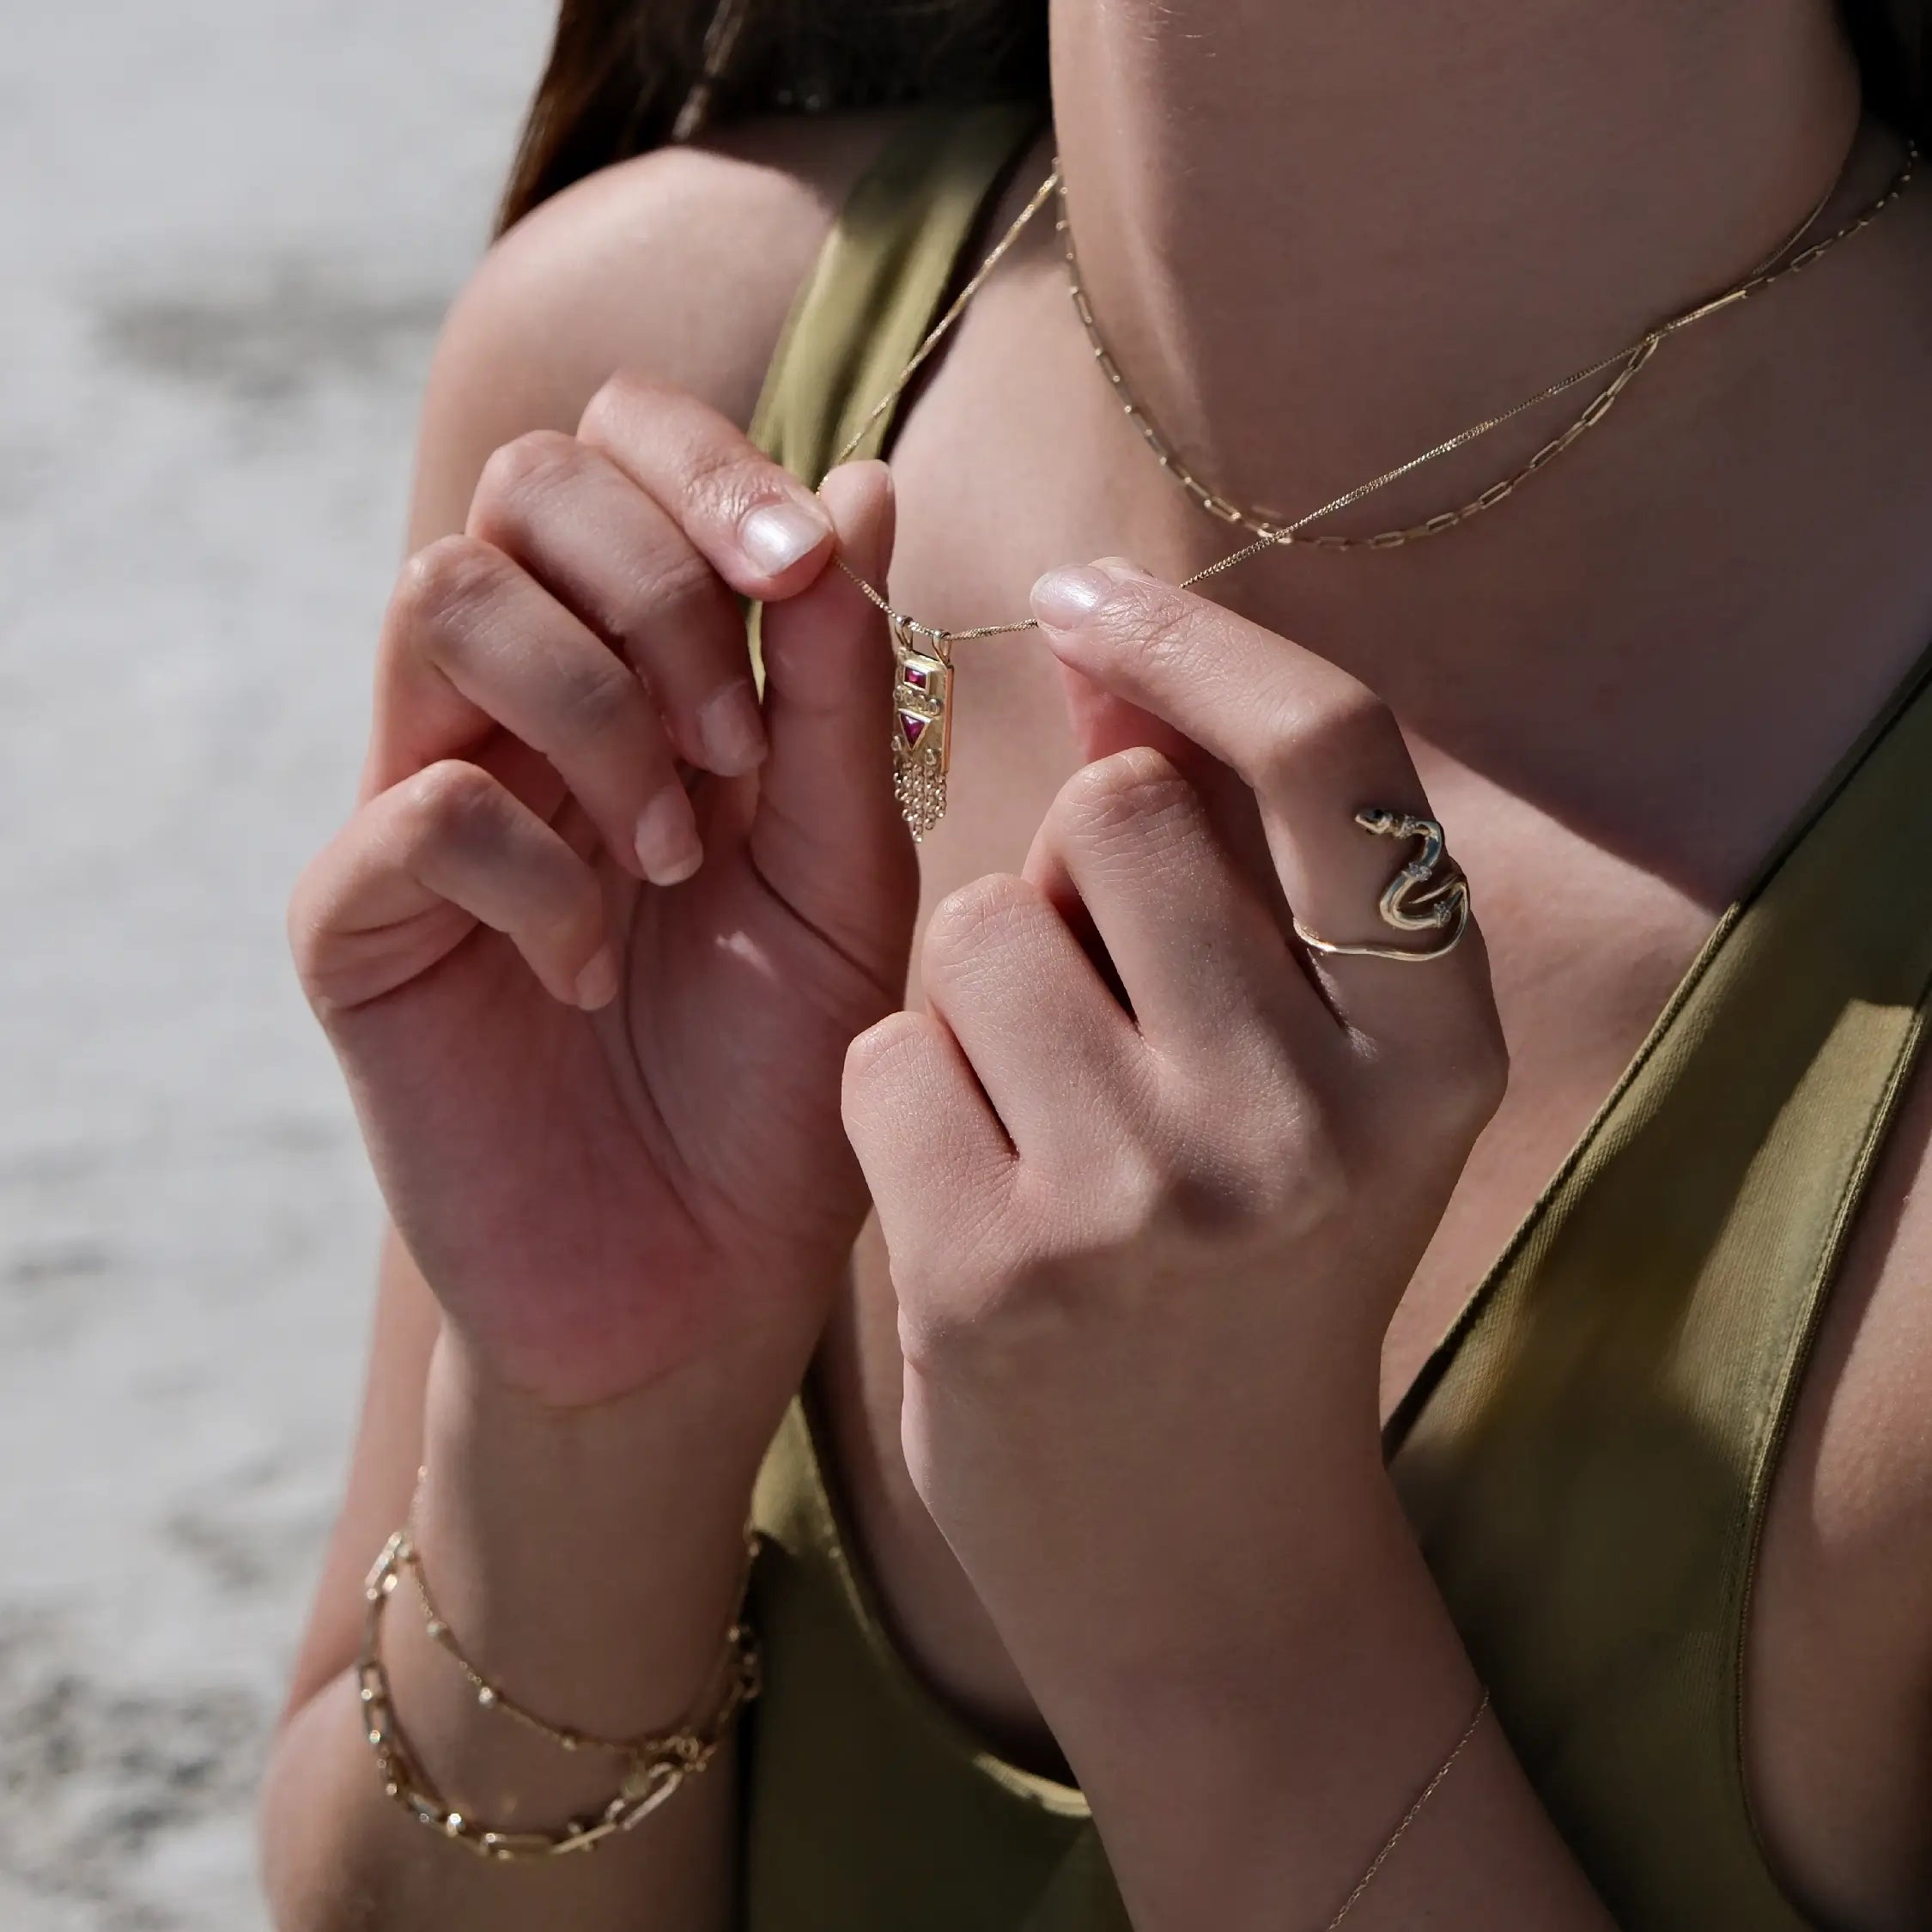 A woman wearing a green top holds a delicate necklace with a small pendant between her fingers. She has a gold rosary bracelet on her right wrist and wears a snake-shaped ring on her right index finger. Her background is an outdoor, sunlit area with a light-colored surface.